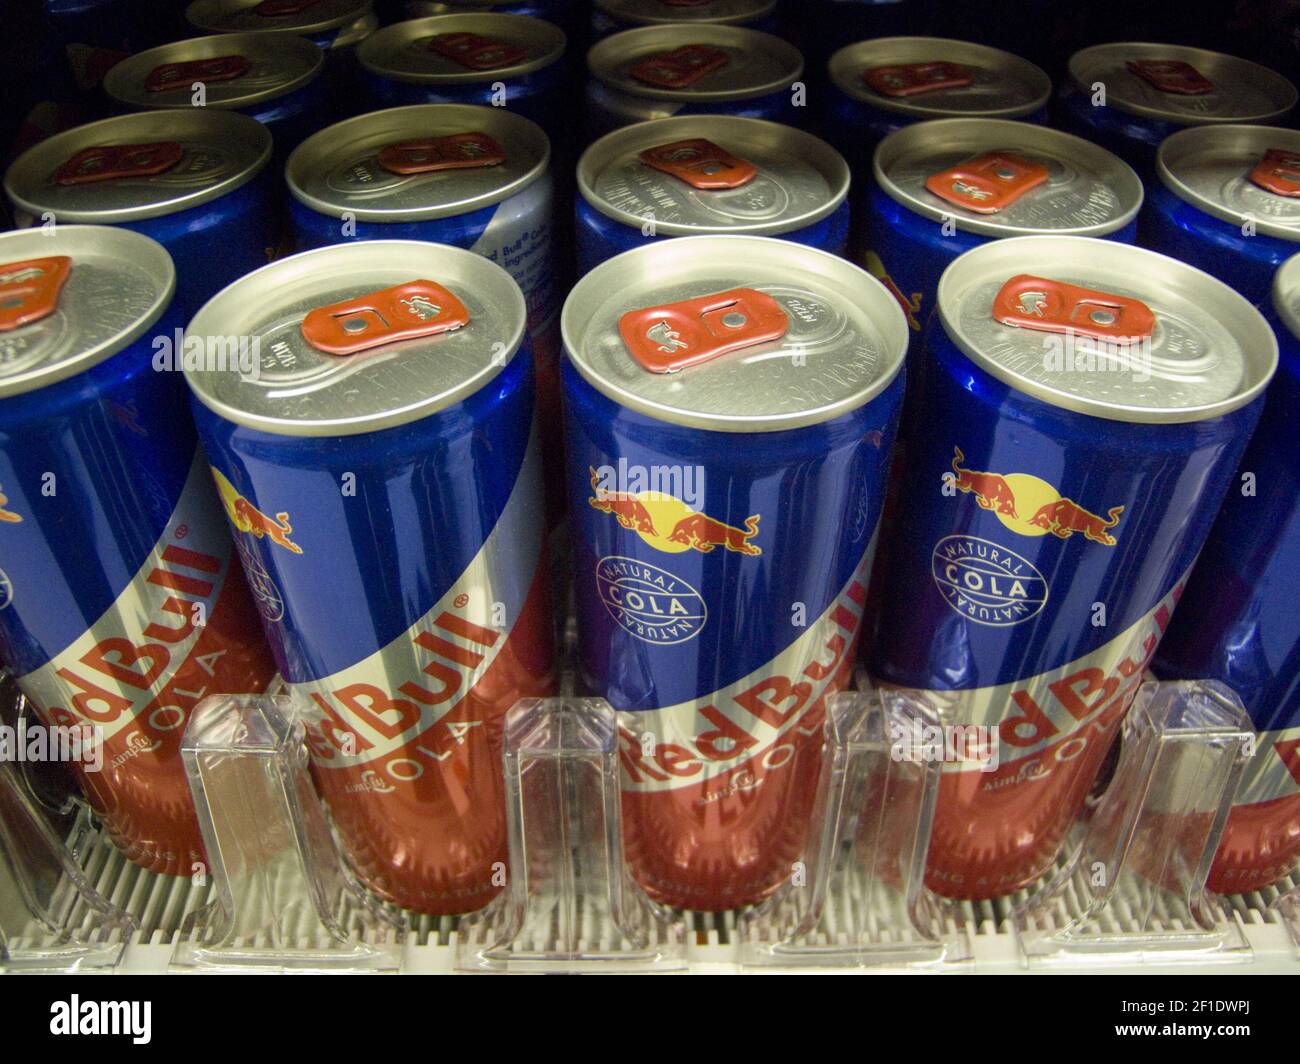 Red Bull Cola energy drink on a supermarket shelf on Friday, January 9,  2009. The energy drinks, which were originally marketed to clubbers and  extreme-sports enthusiasts, have entered the mainstream, appealing to